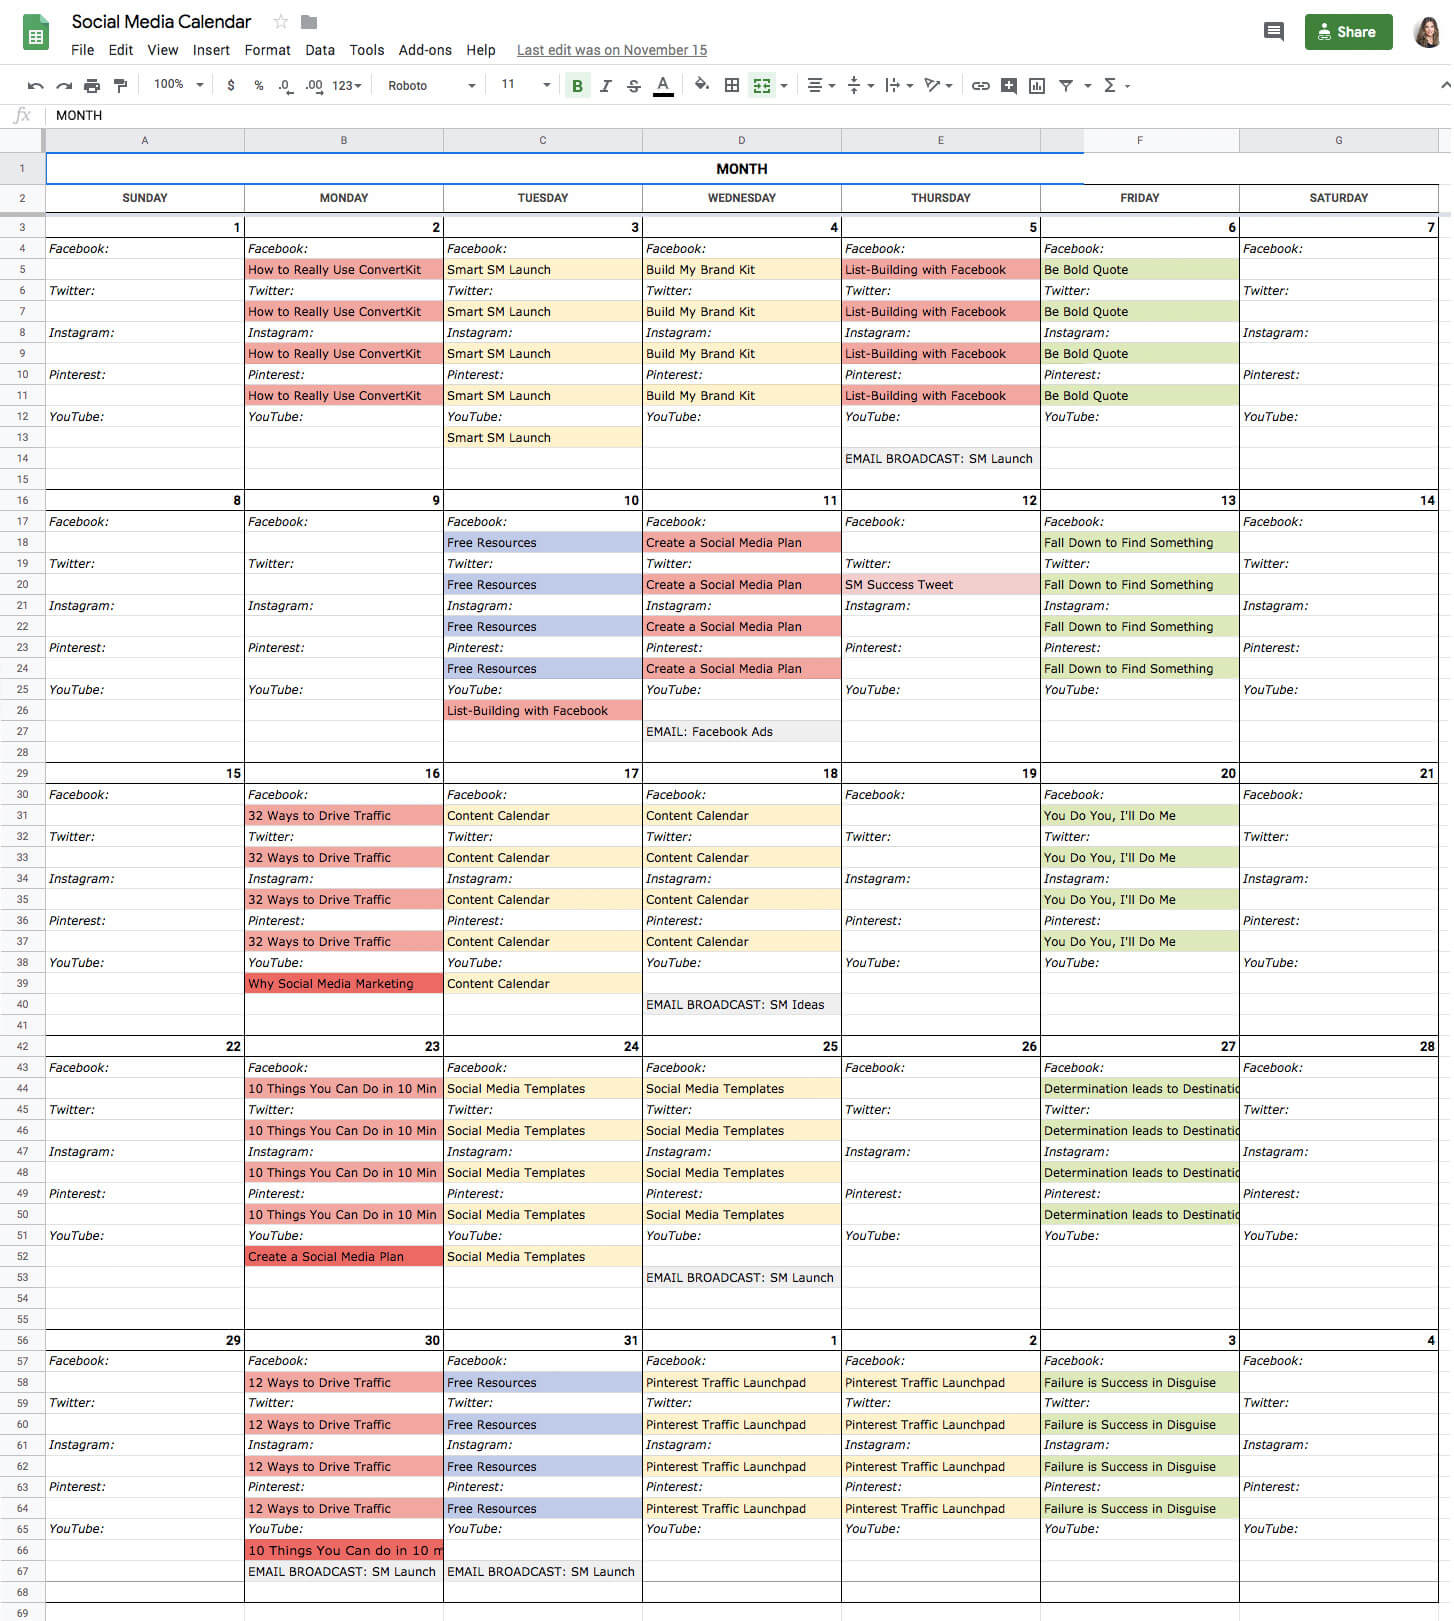 Content Calendar Template by Sandra at ConversionMinded